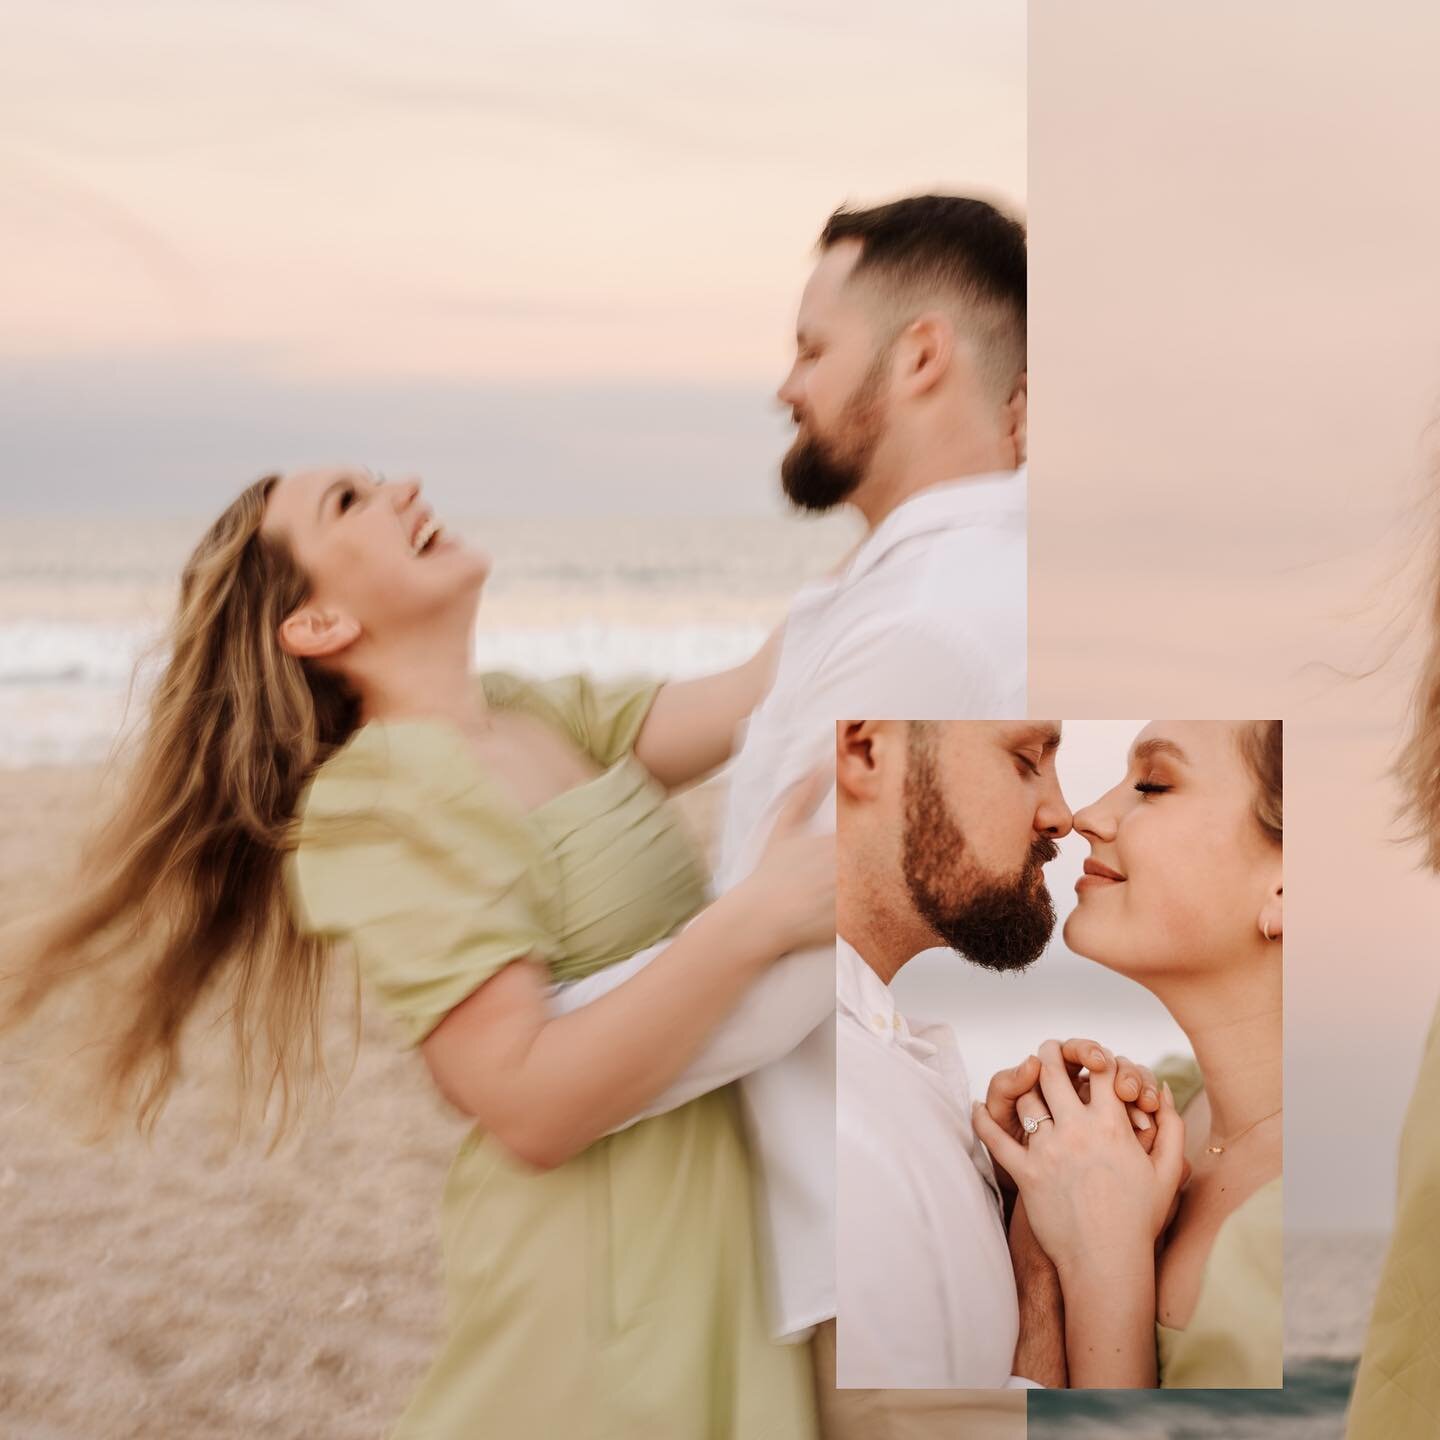 Did I maybeeee give into the blurry photo trend? Yes. Do I love it? Also yes. 😍 Will they age well? Not sure 😅😂 Regardless, had so much fun trying something new!! Shout out to these two for their patience with me trying to get these shots!! 💛

#v